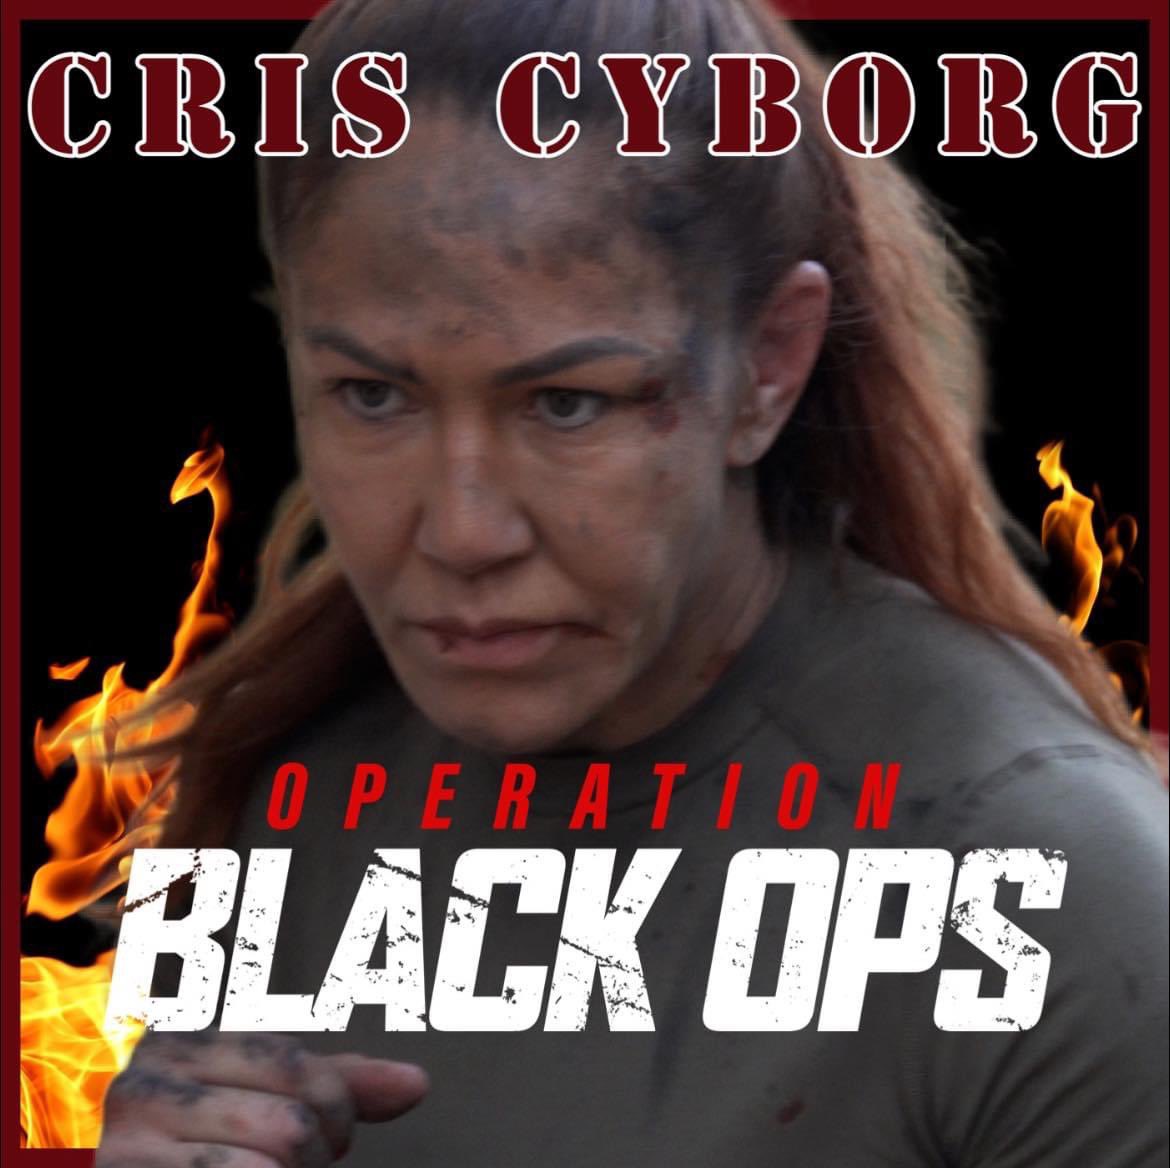 Cris Cyborg is a force to be reckoned in OPERATION BLACK OPS, coming to Digital (iTunes, Amazon, Vudu, Google Play and more!) July 11!